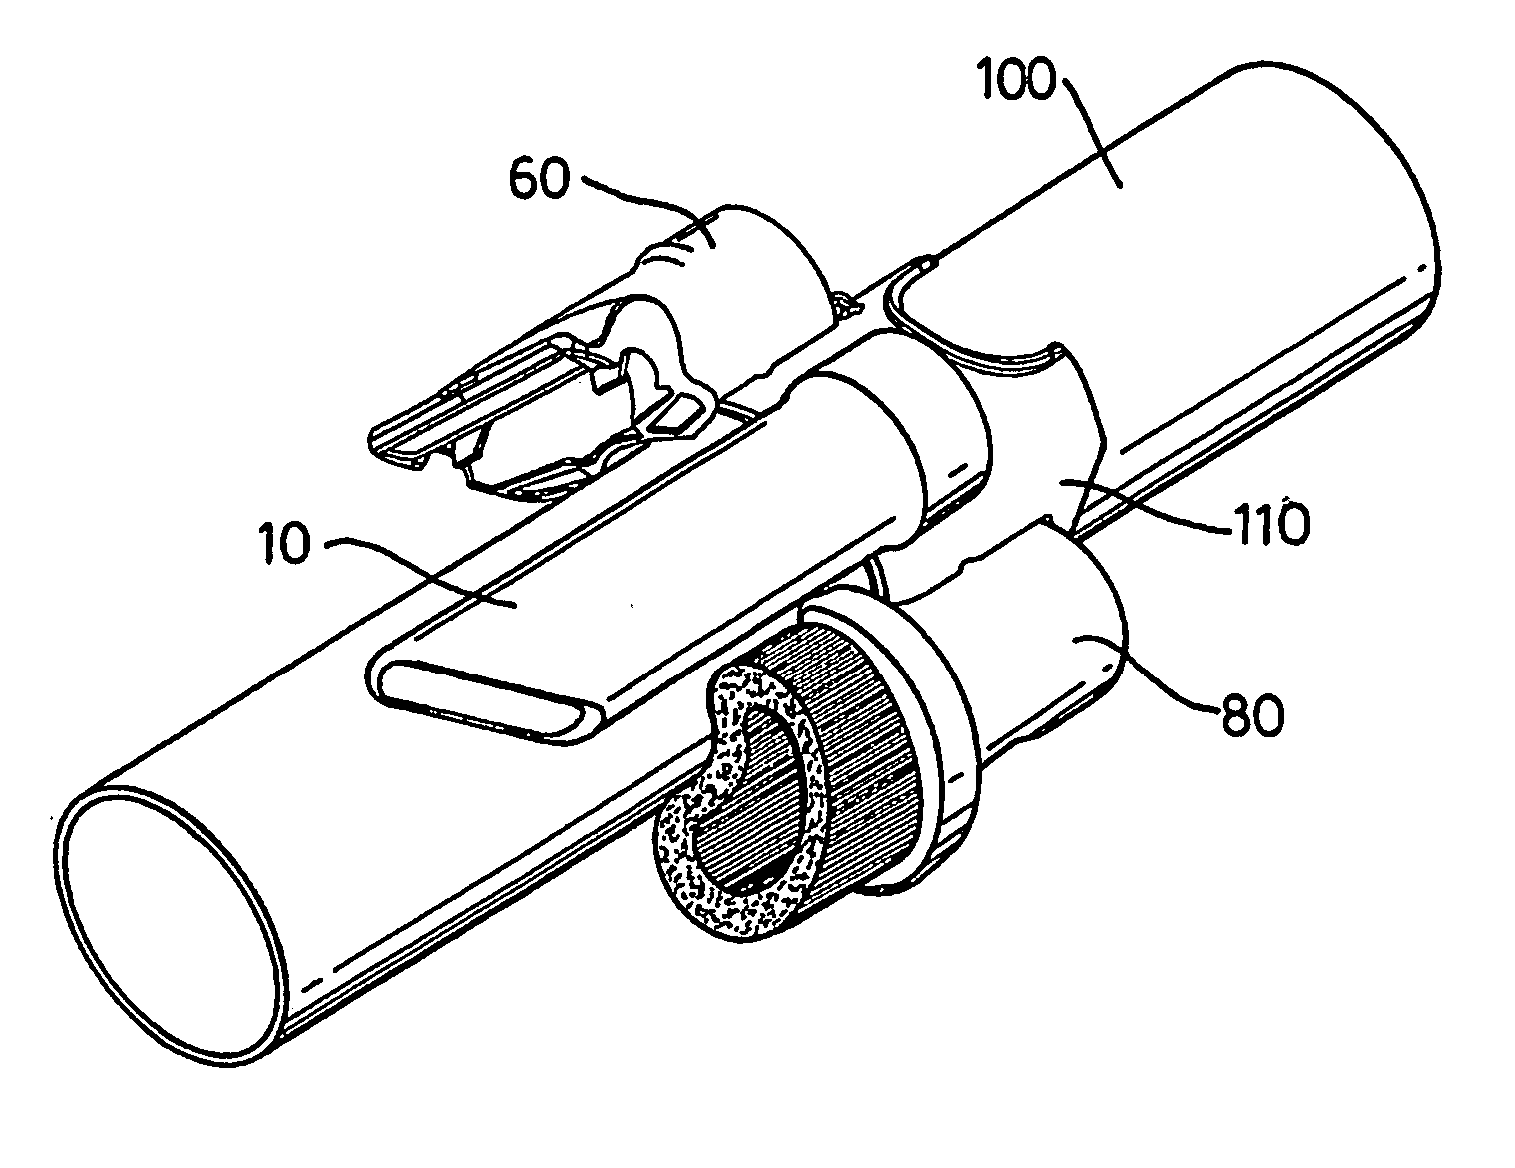 Attachment for a Cleaning Appliance